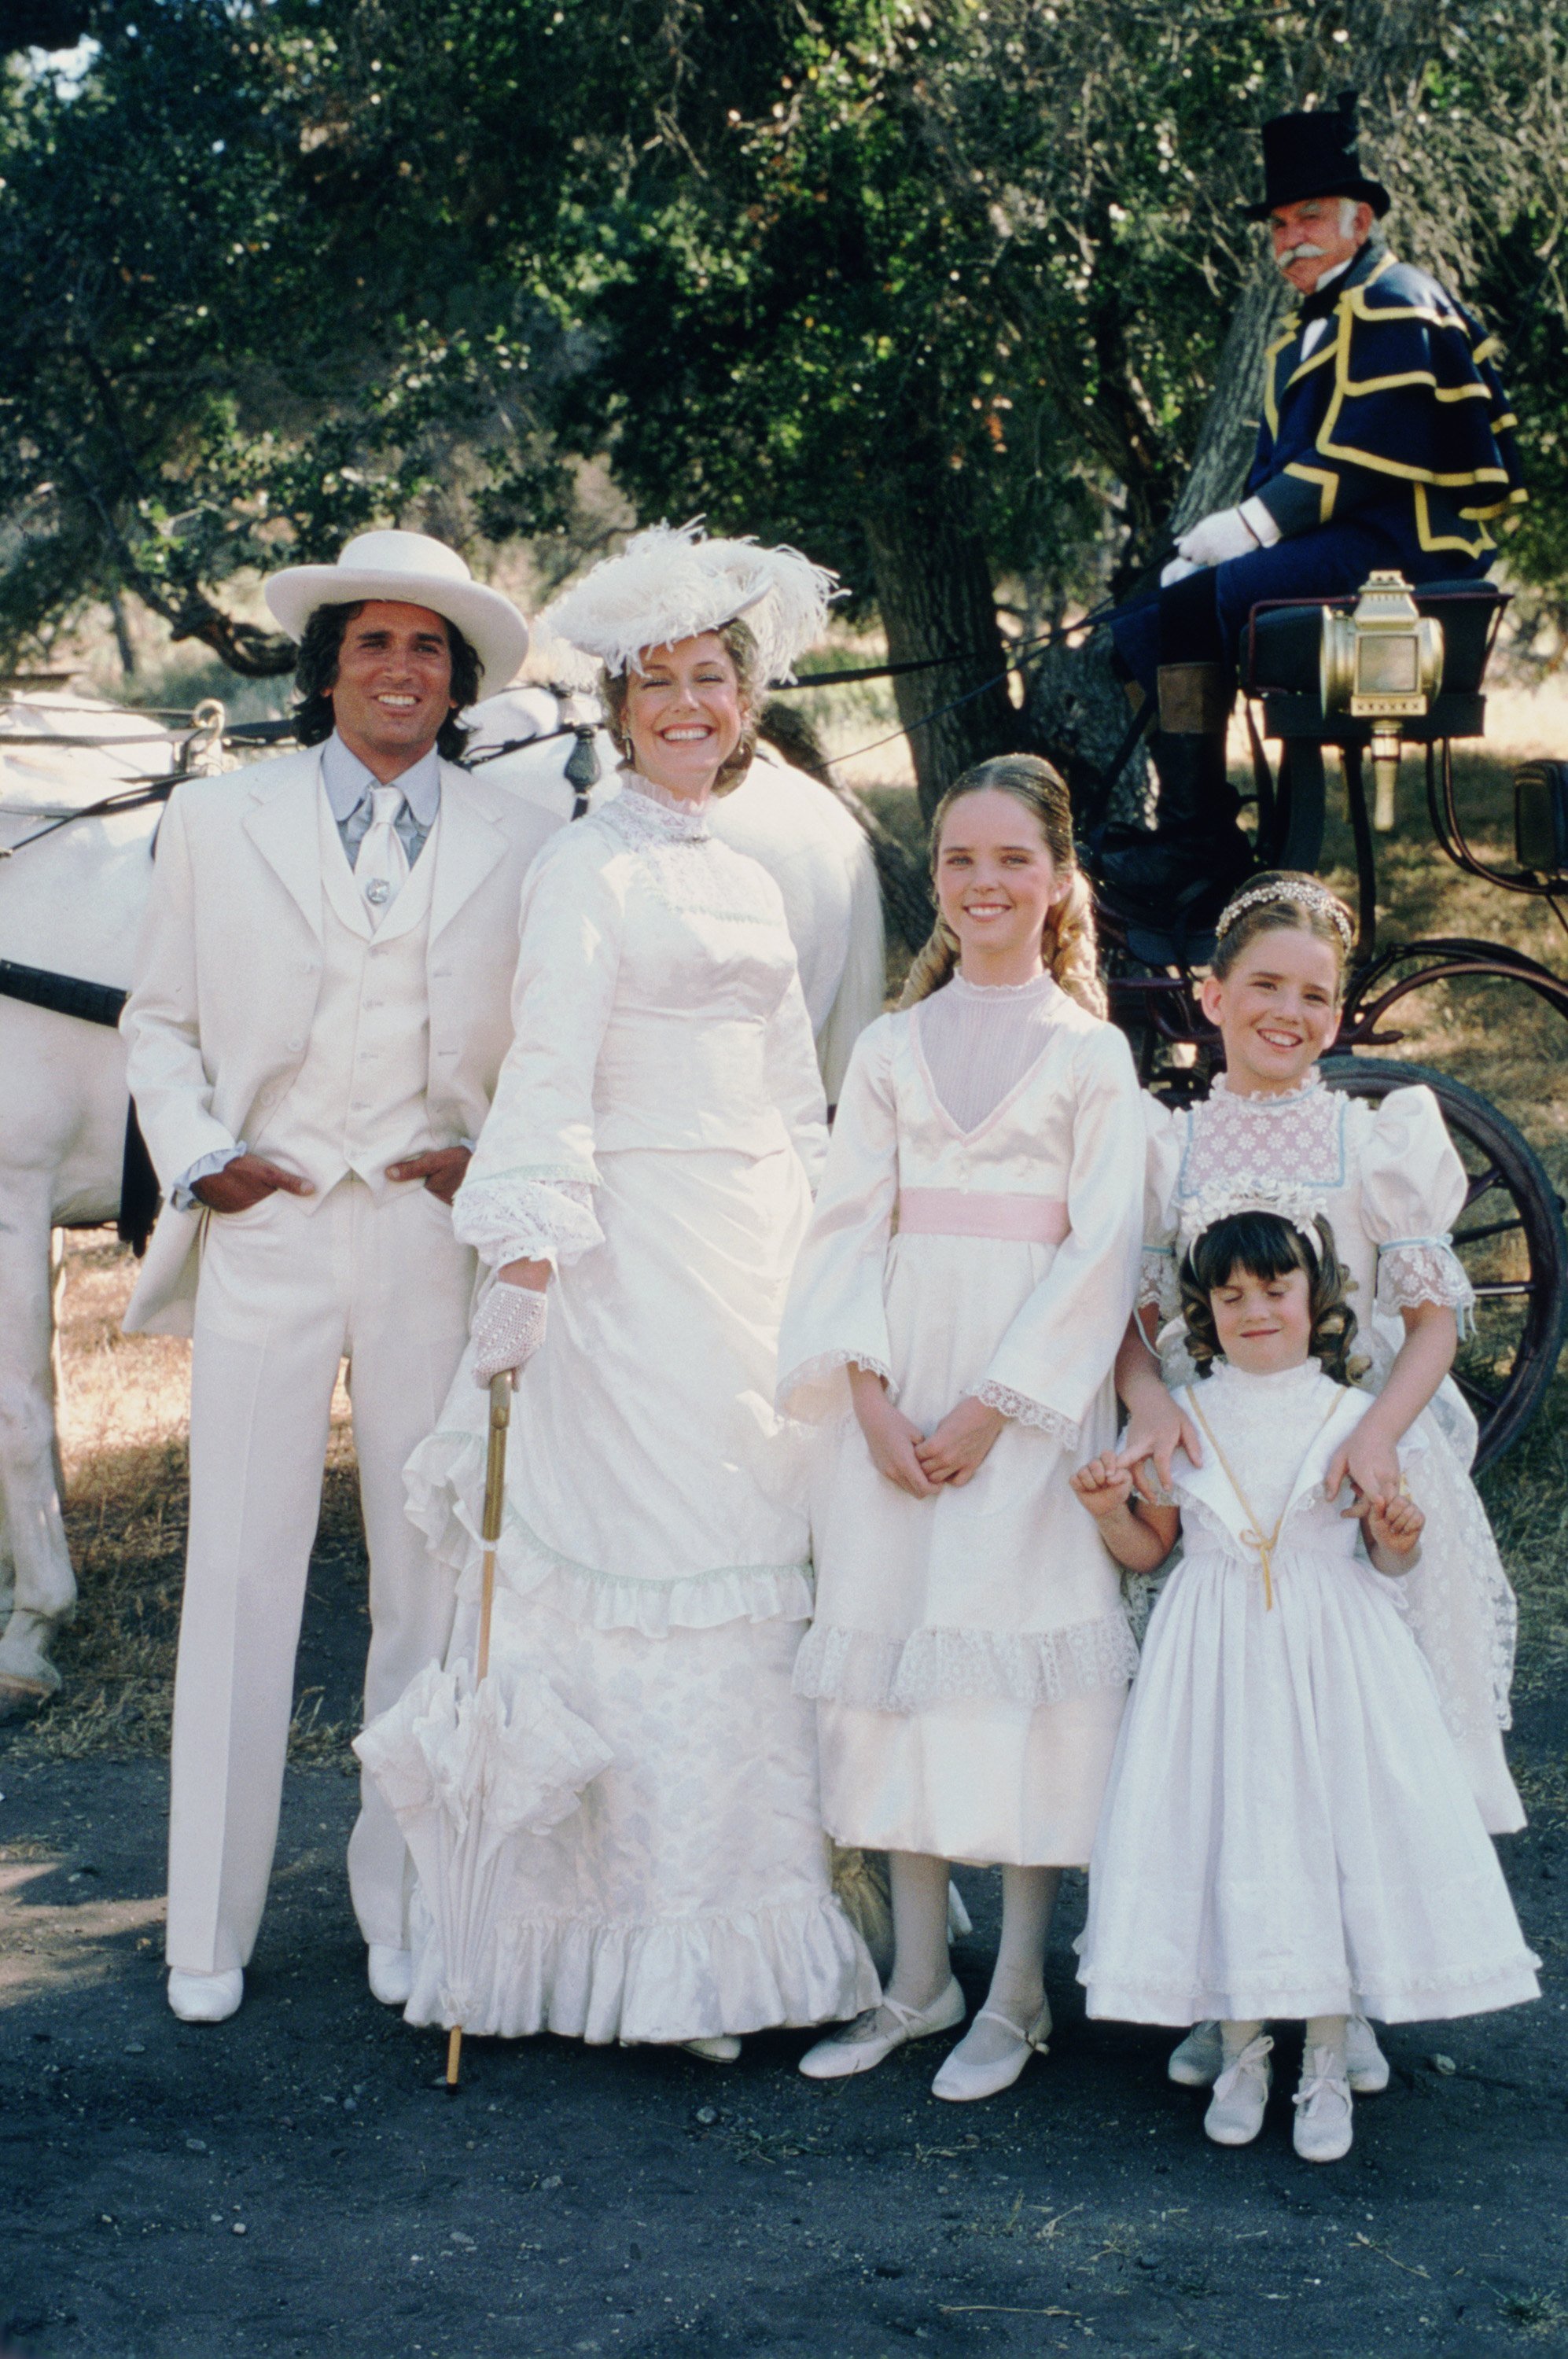 The Ingalls Family in 'Little House on the Prairie', 1975 